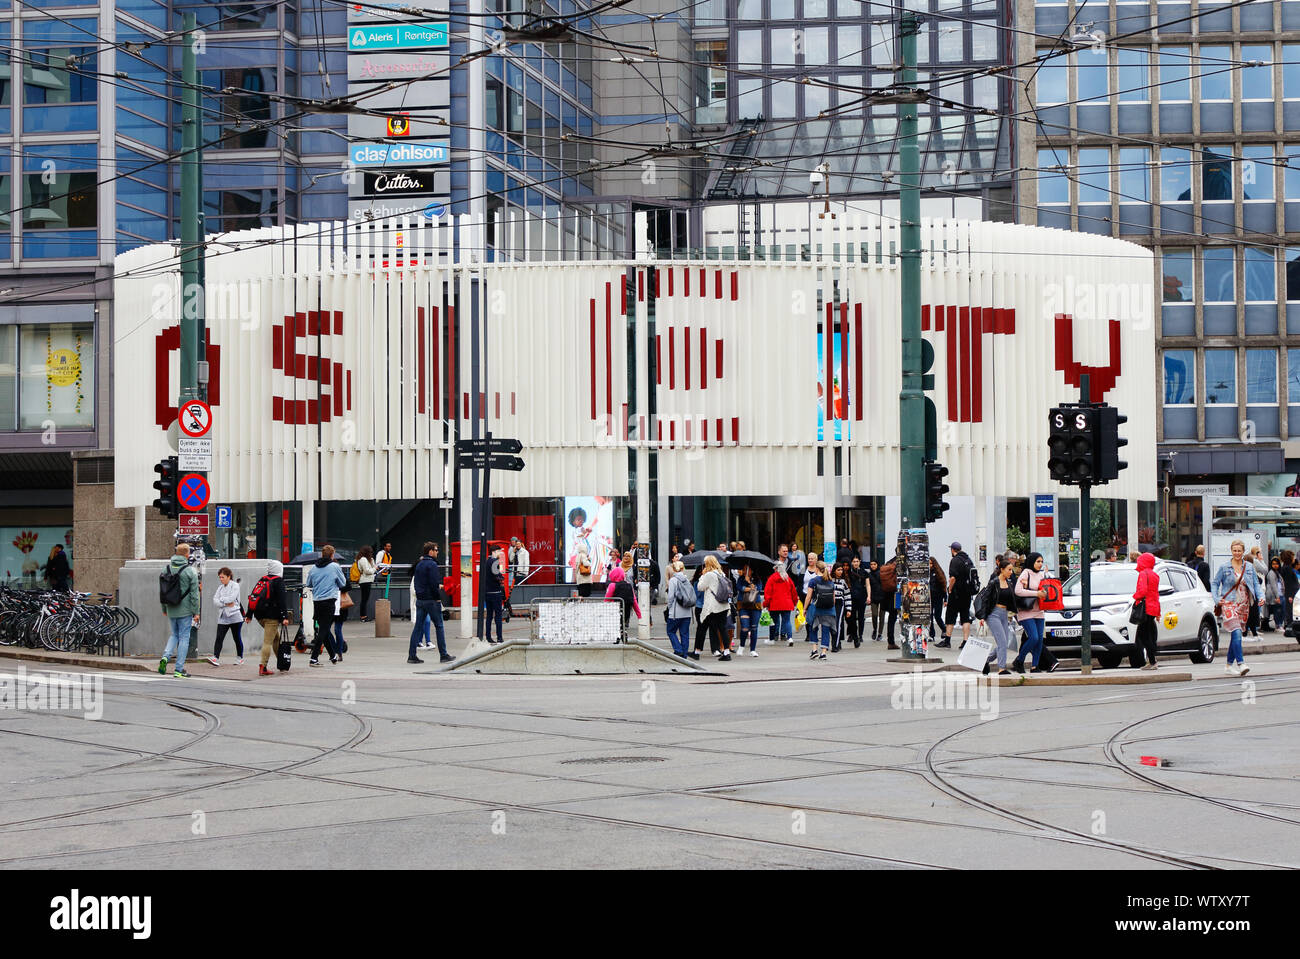 Oslo, Norway - June 20, 2019: The main entrance to the Oslo City shopping mall. Stock Photo